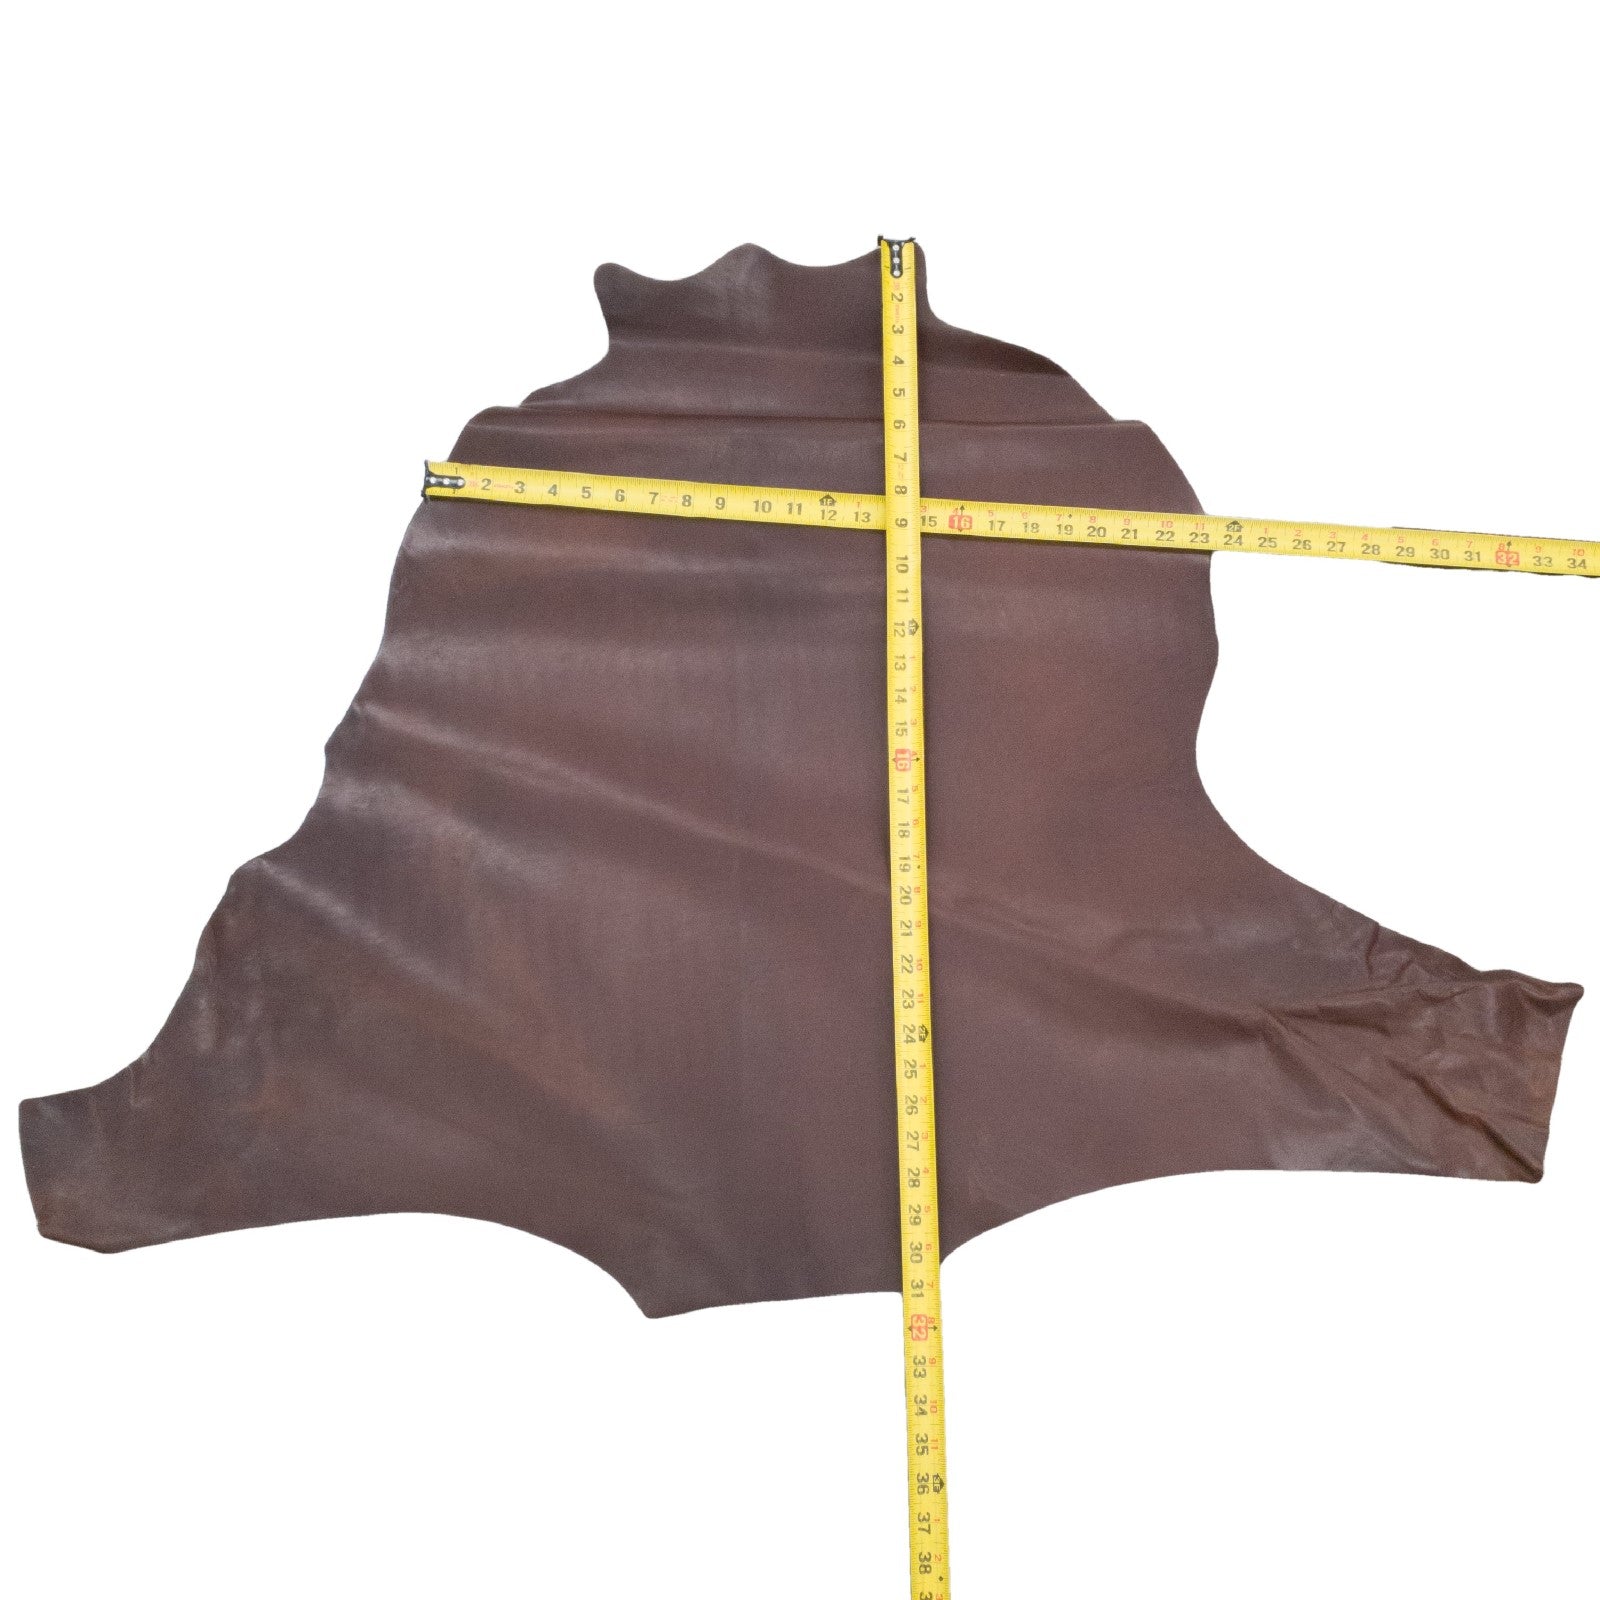 Kangaroo Chocolate Dyed Veg Tanned 5 - 7 Sq Ft Hides 2-3 oz, 5 Sq Ft / Hide 2 | The Leather Guy